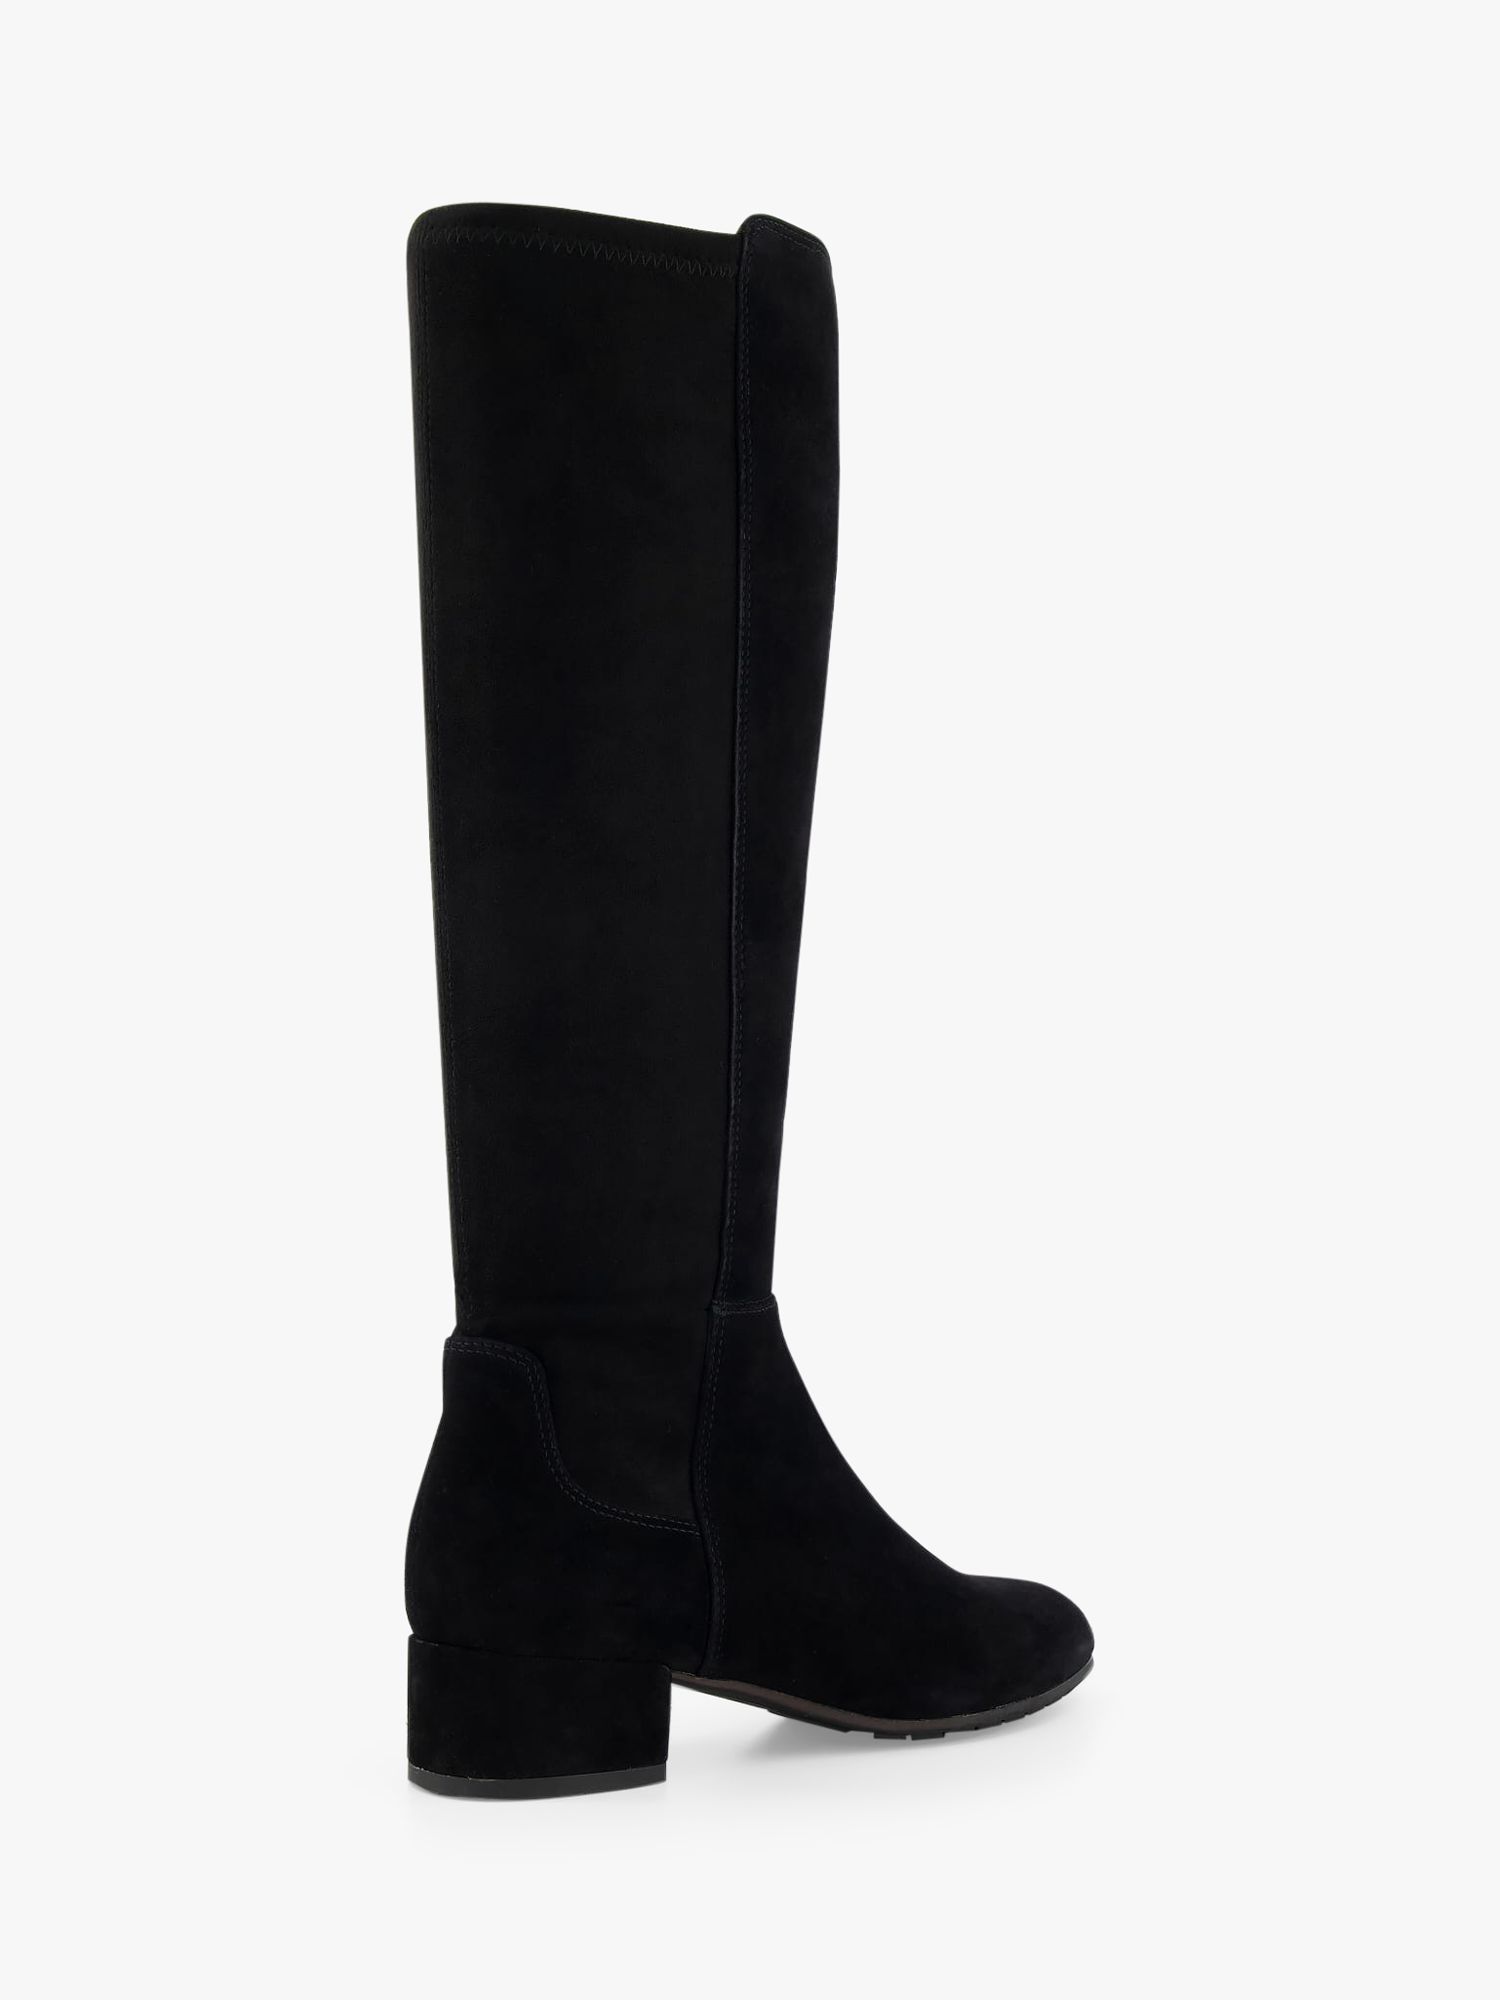 Dune Tayla Suede Knee High Boots, Black at John Lewis & Partners